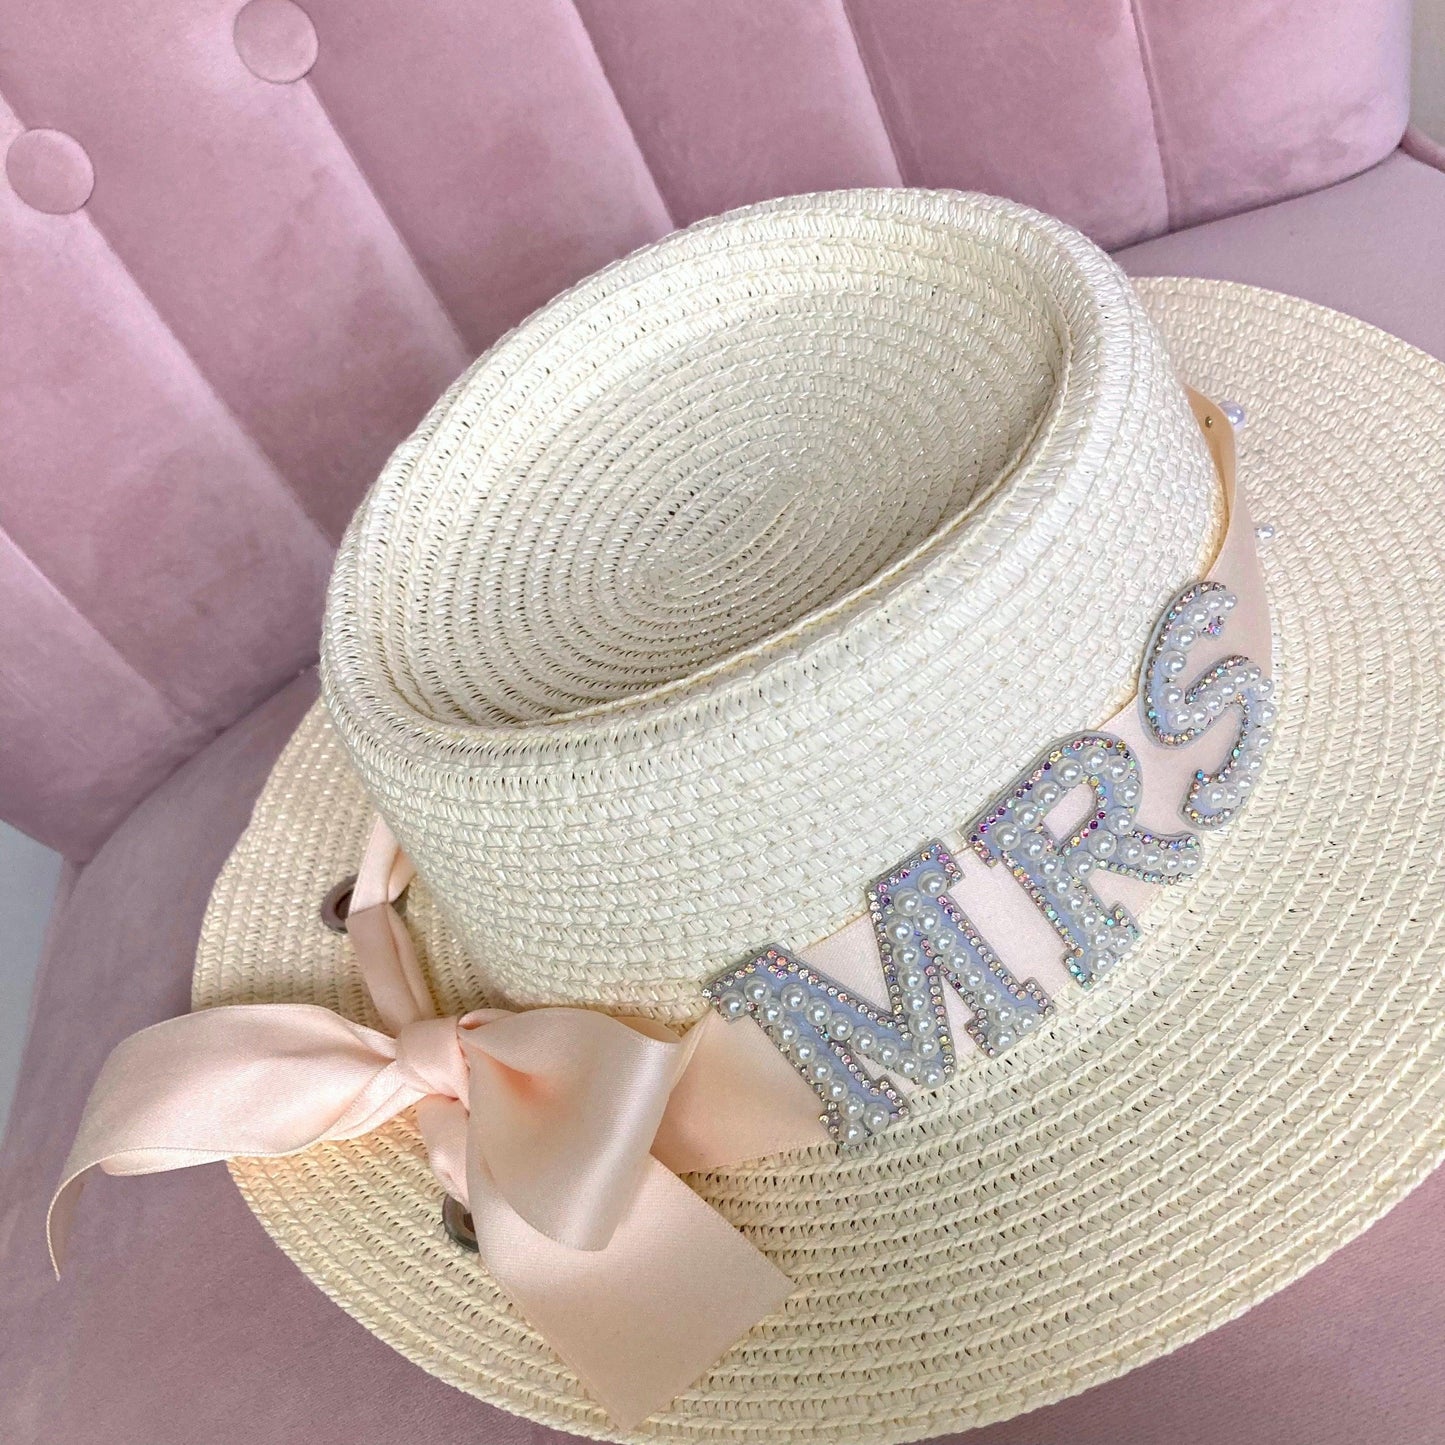 Mrs bridal straw hat with pink ribbon and pearl lettering